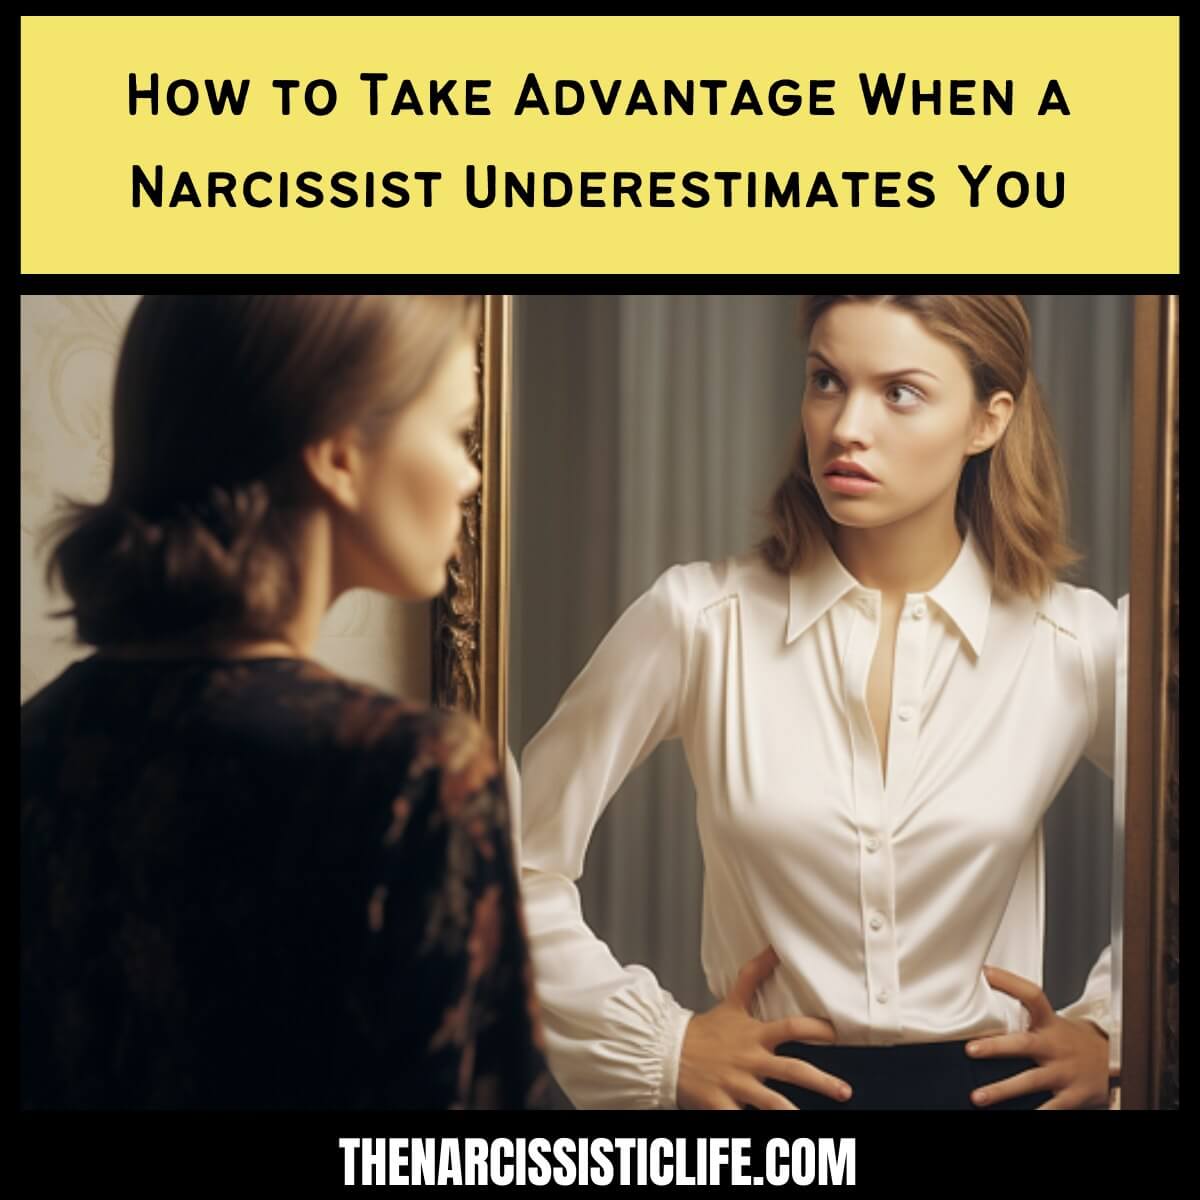 How to Take Advantage When a Narcissist Underestimates You